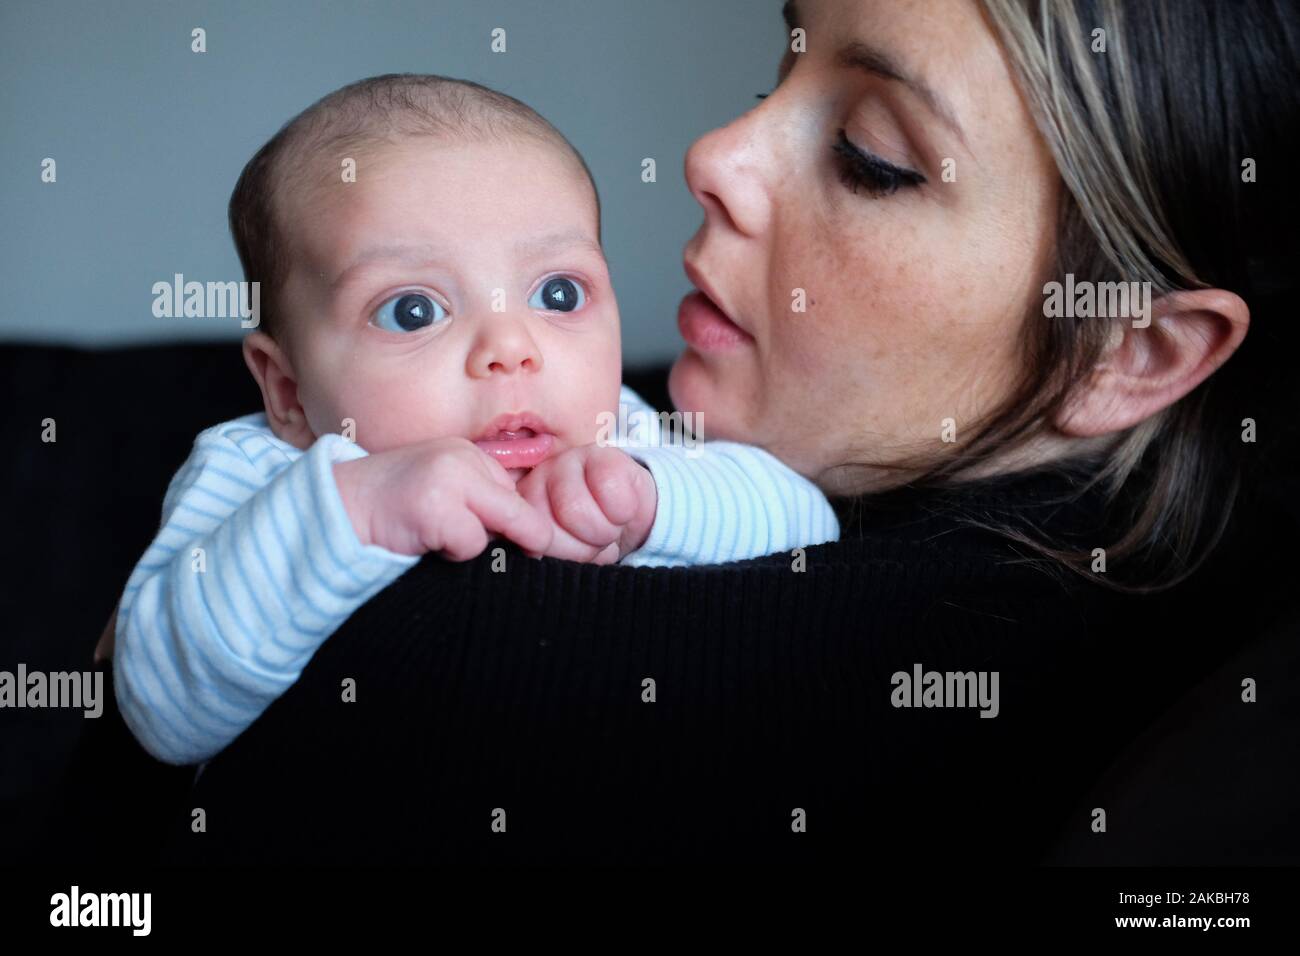 Young mother with her new baby son of 1 month old with big eyes Stock Photo